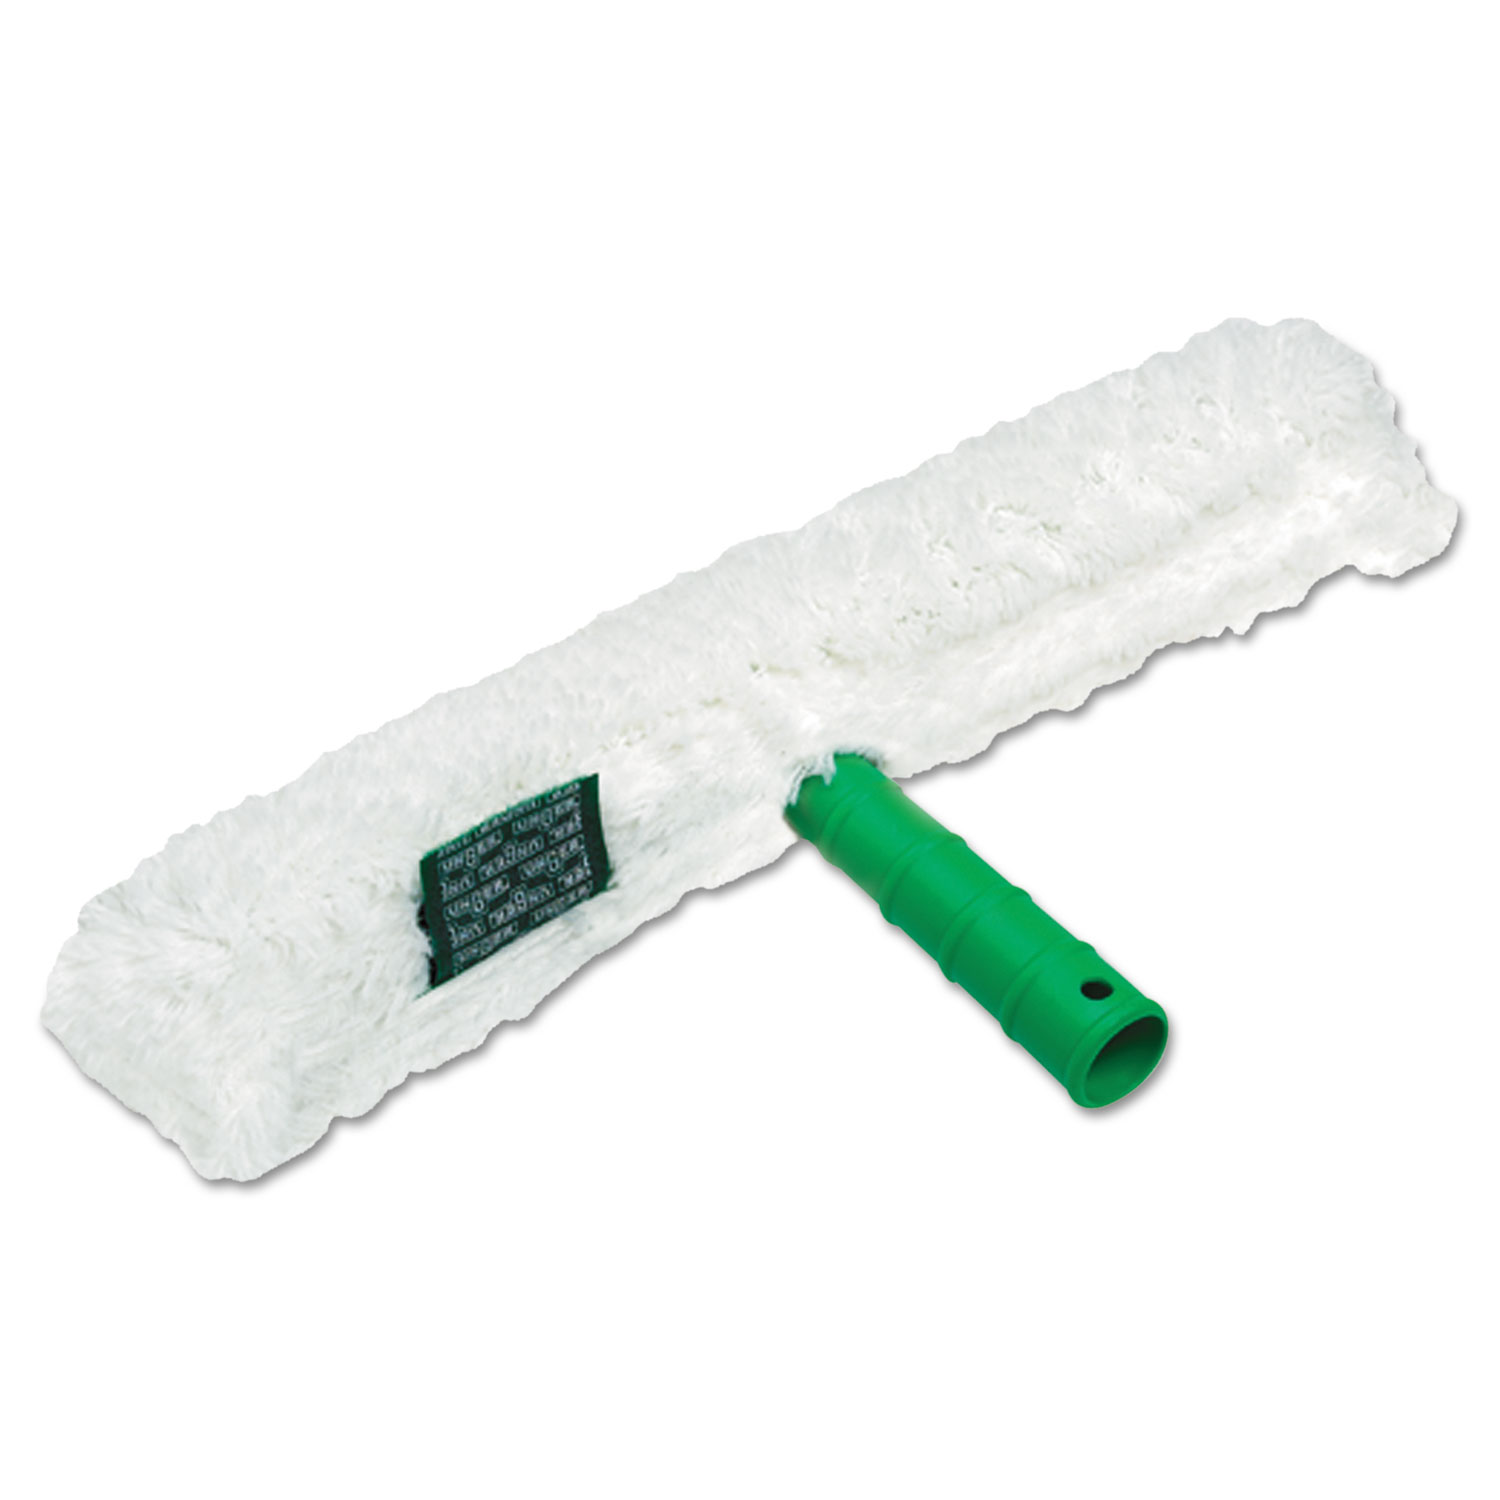 Unger StarDuster Pipe Brush, 11 inch, Green Handle